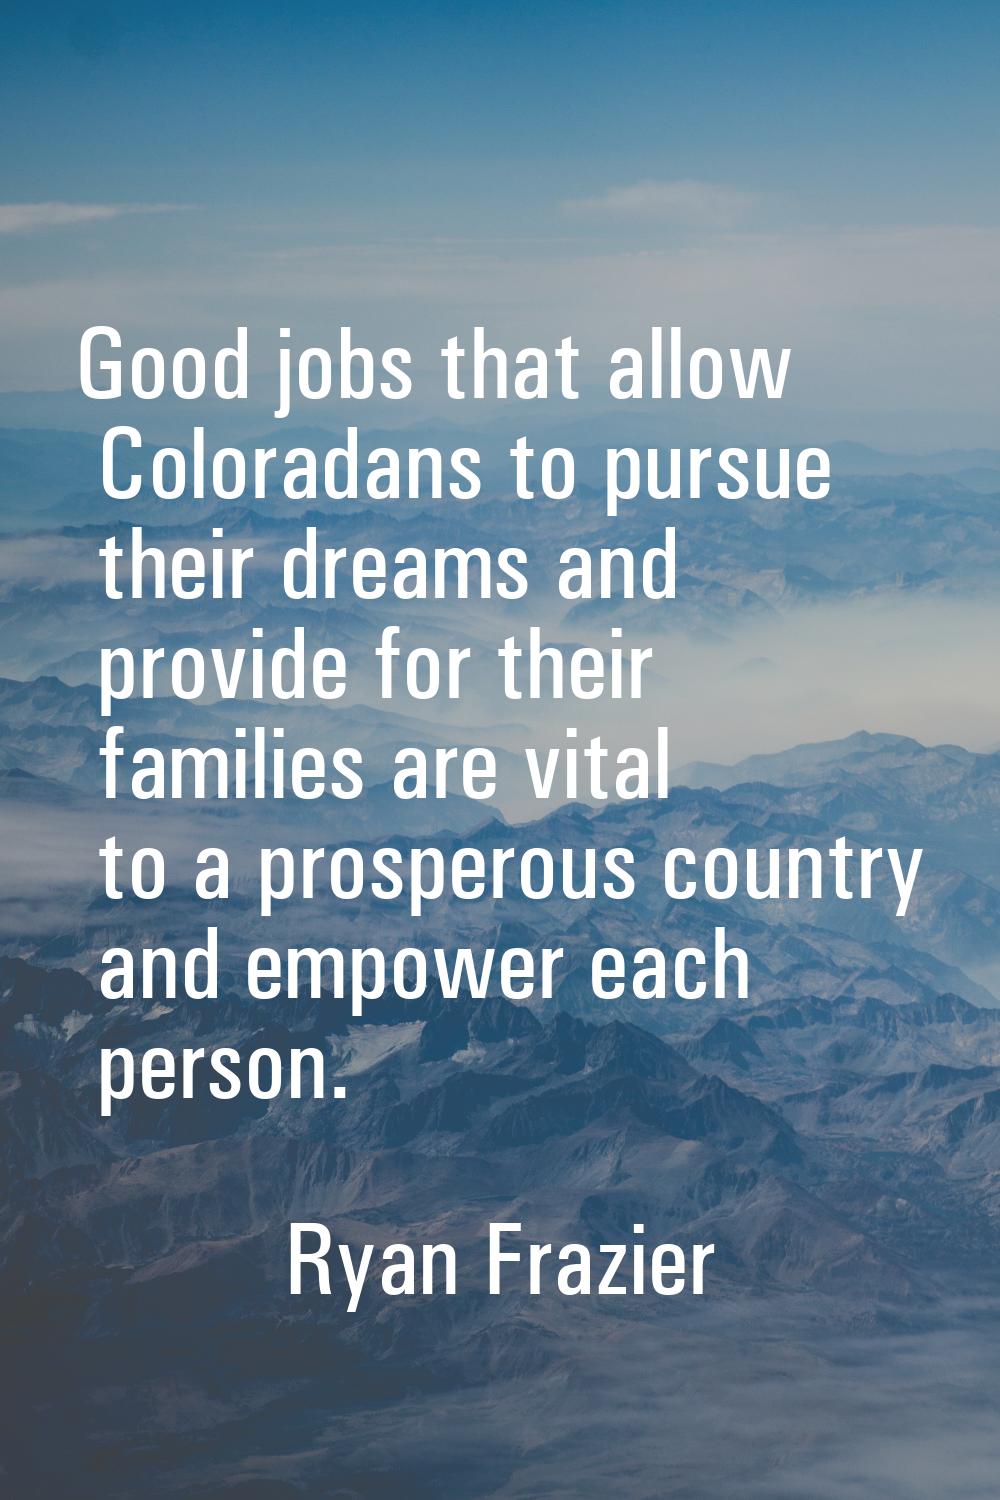 Good jobs that allow Coloradans to pursue their dreams and provide for their families are vital to 